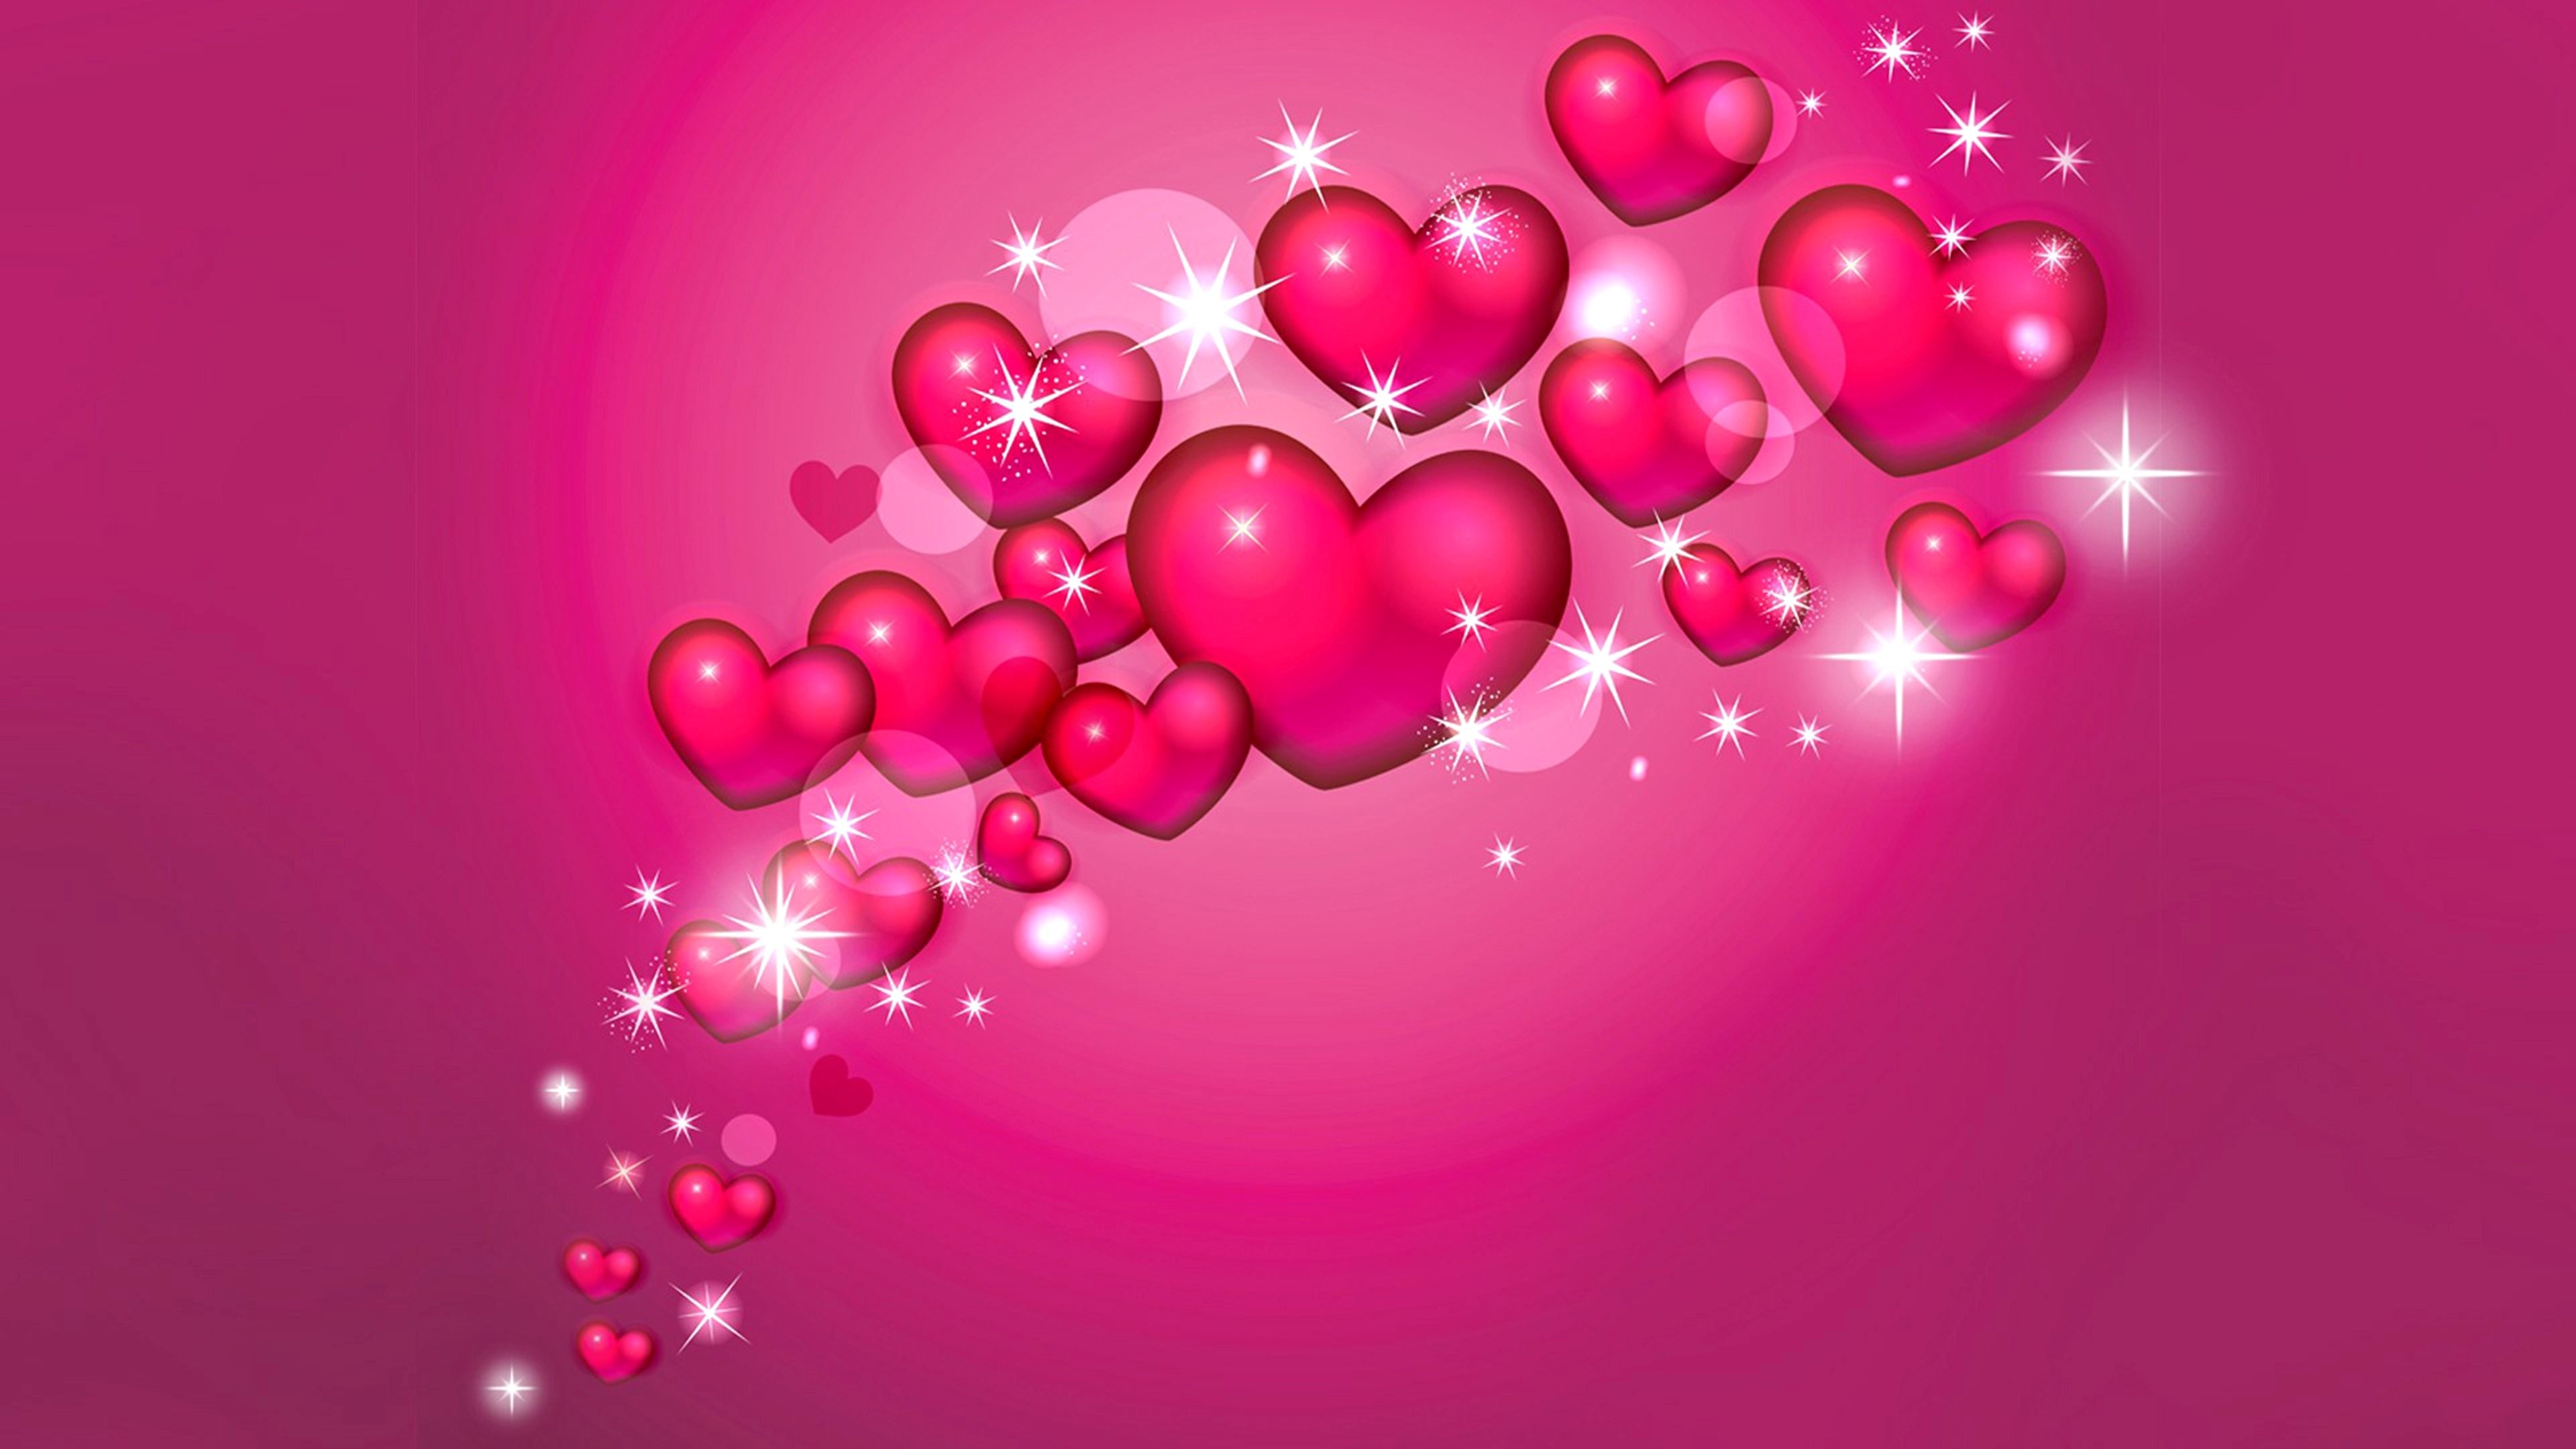 pink heart that says love